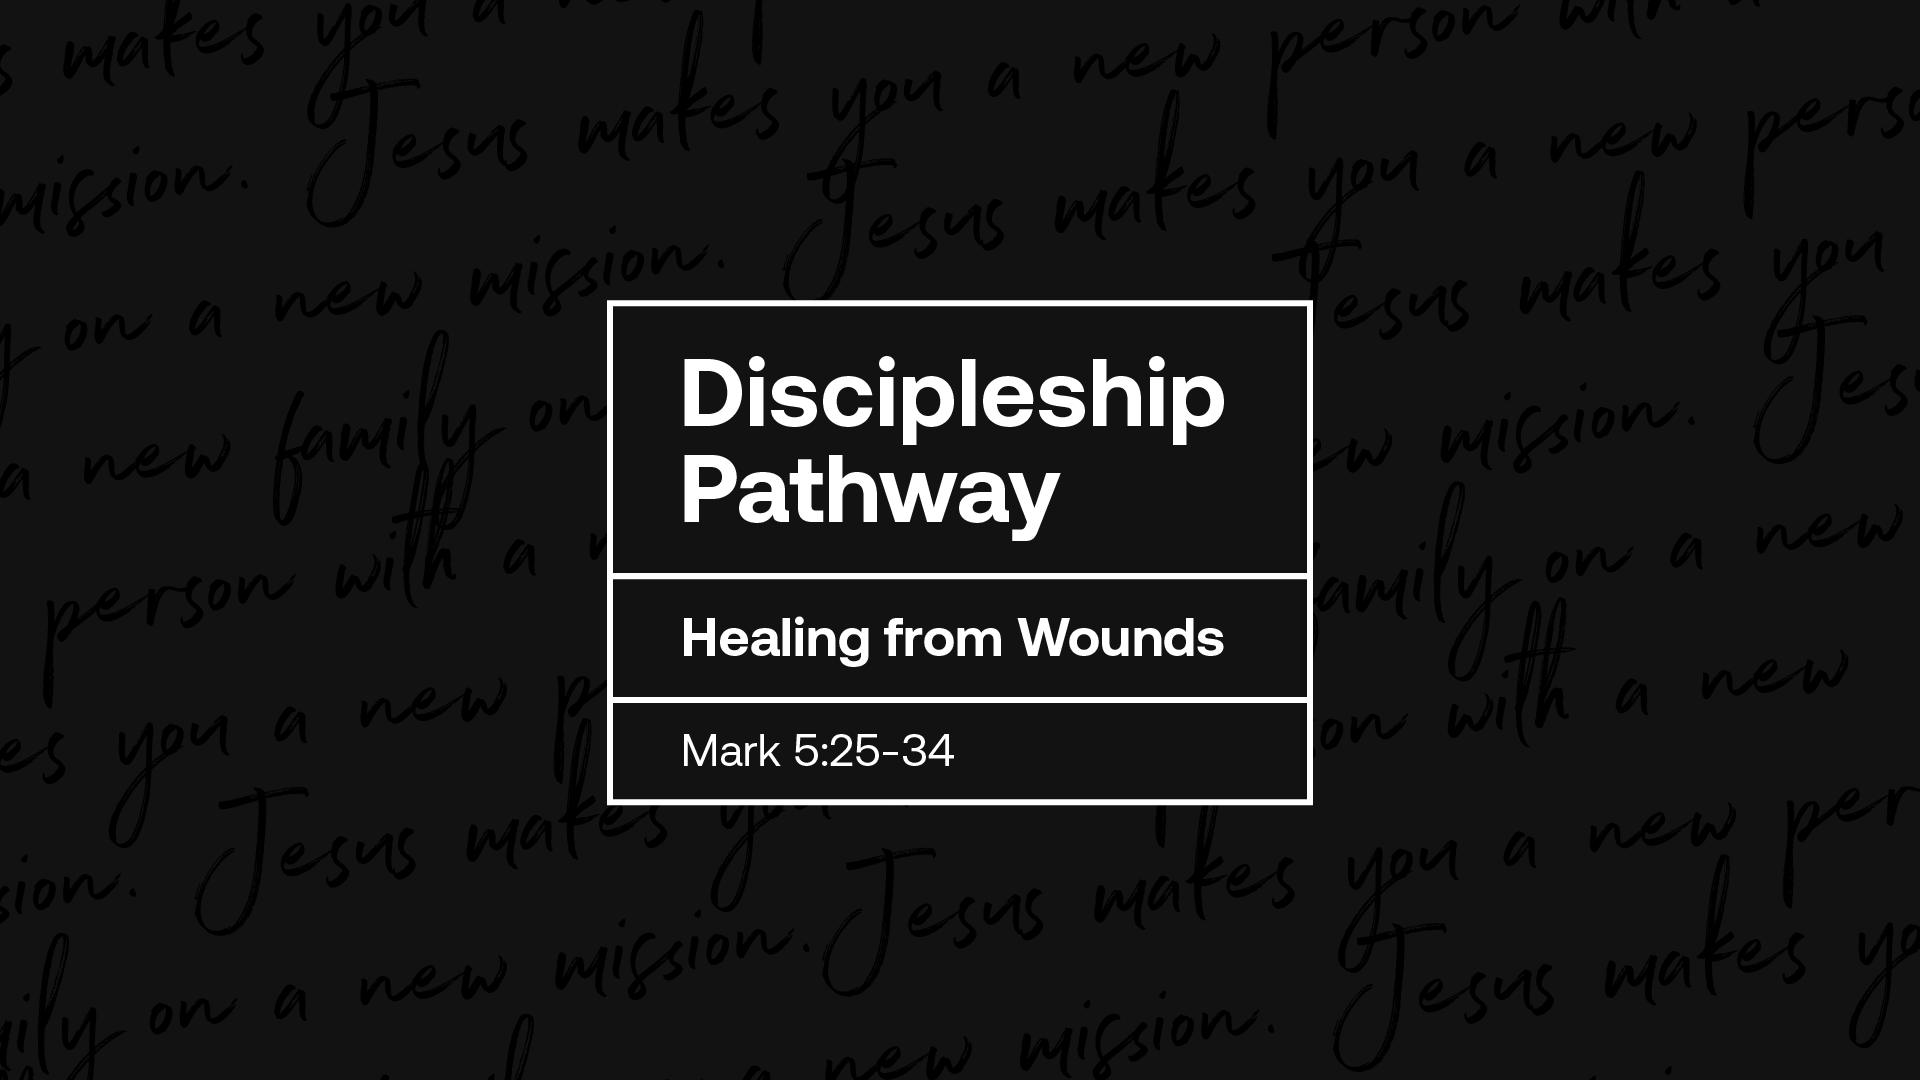 Healing from Wounds